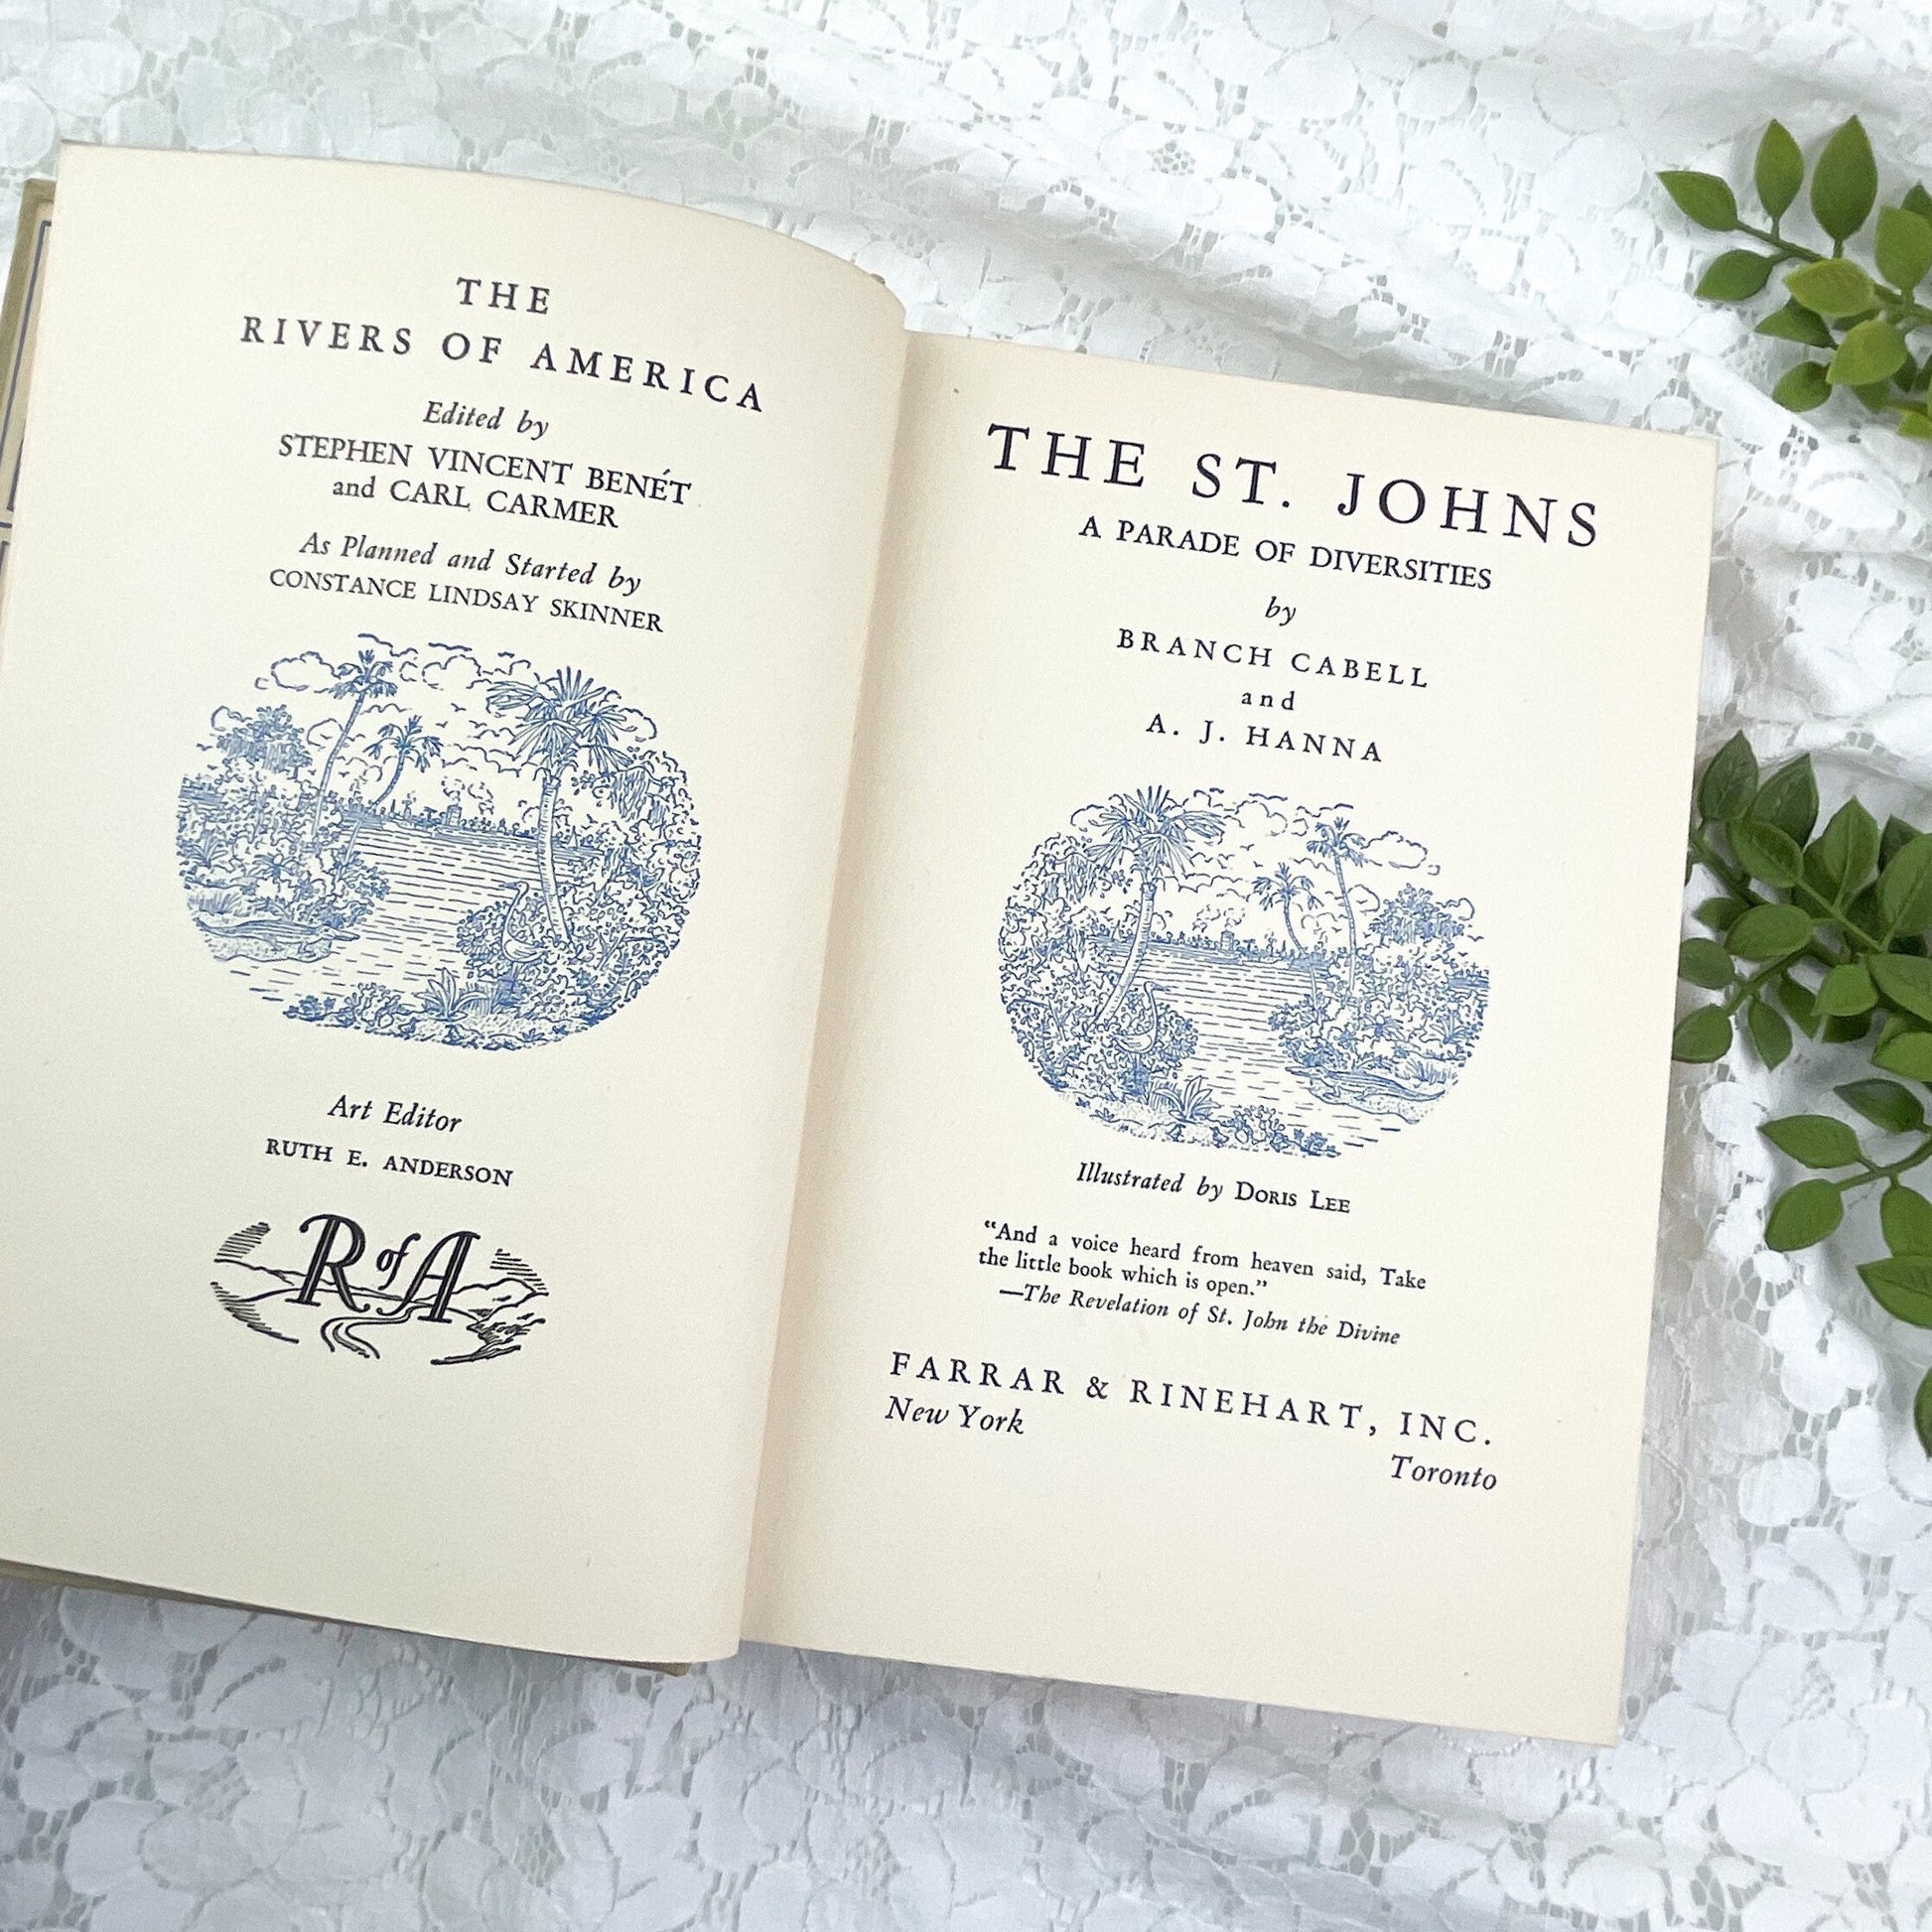 The St. Johns: A Parade of Diversities by Branch Cabell & A.J. Hanna